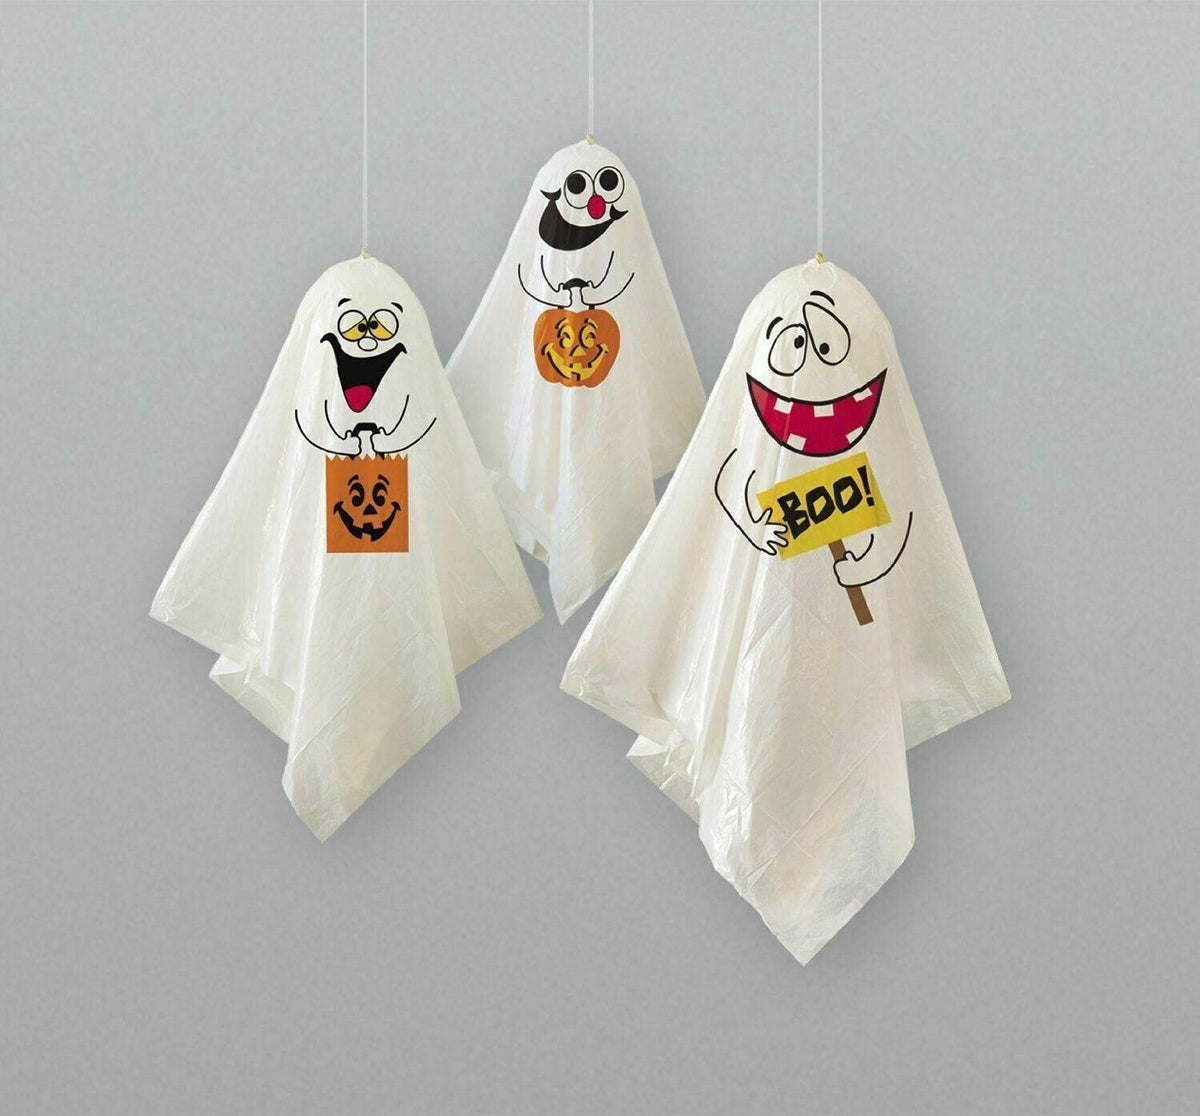 Happy Halloween Balloons - 3 Scary Halloween Hanging Decoration Ghost Bags Balloons